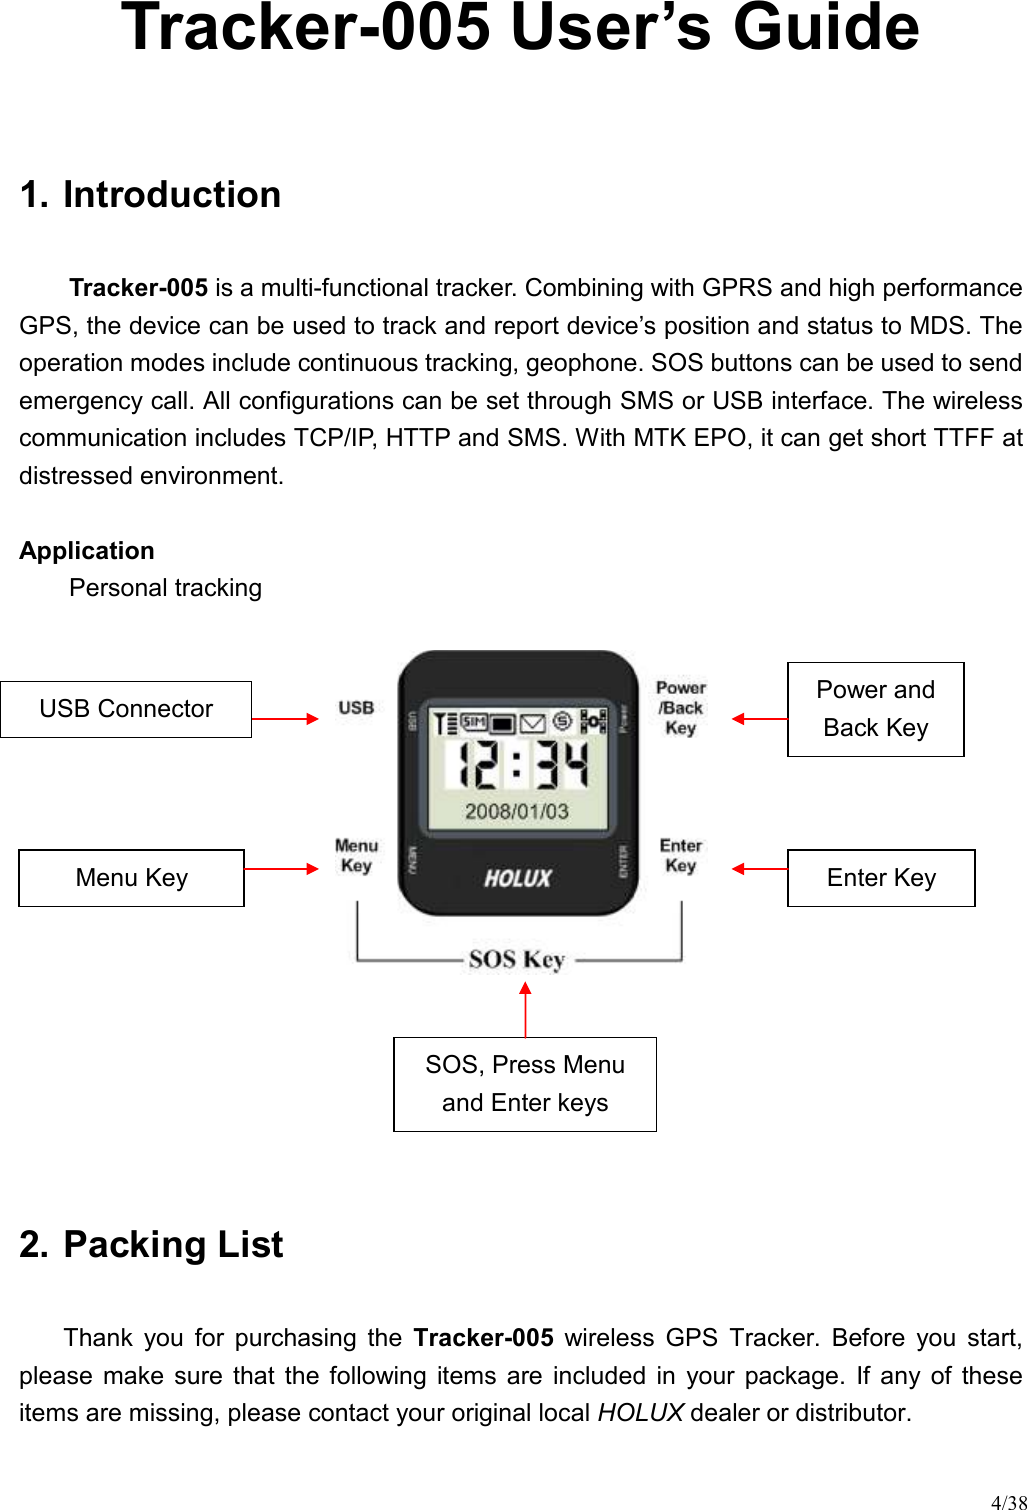 4/38 Tracker-005 User’s Guide  1. Introduction Tracker-005 is a multi-functional tracker. Combining with GPRS and high performance GPS, the device can be used to track and report device’s position and status to MDS. The operation modes include continuous tracking, geophone. SOS buttons can be used to send emergency call. All configurations can be set through SMS or USB interface. The wireless communication includes TCP/IP, HTTP and SMS. With MTK EPO, it can get short TTFF at distressed environment.  Application   Personal tracking          2. Packing List Thank  you  for  purchasing  the  Tracker-005  wireless  GPS  Tracker.  Before  you  start, please  make  sure  that  the  following  items  are  included  in  your  package.  If  any  of  these items are missing, please contact your original local HOLUX dealer or distributor.  Enter Key Menu Key Power and Back Key USB Connector SOS, Press Menu and Enter keys 